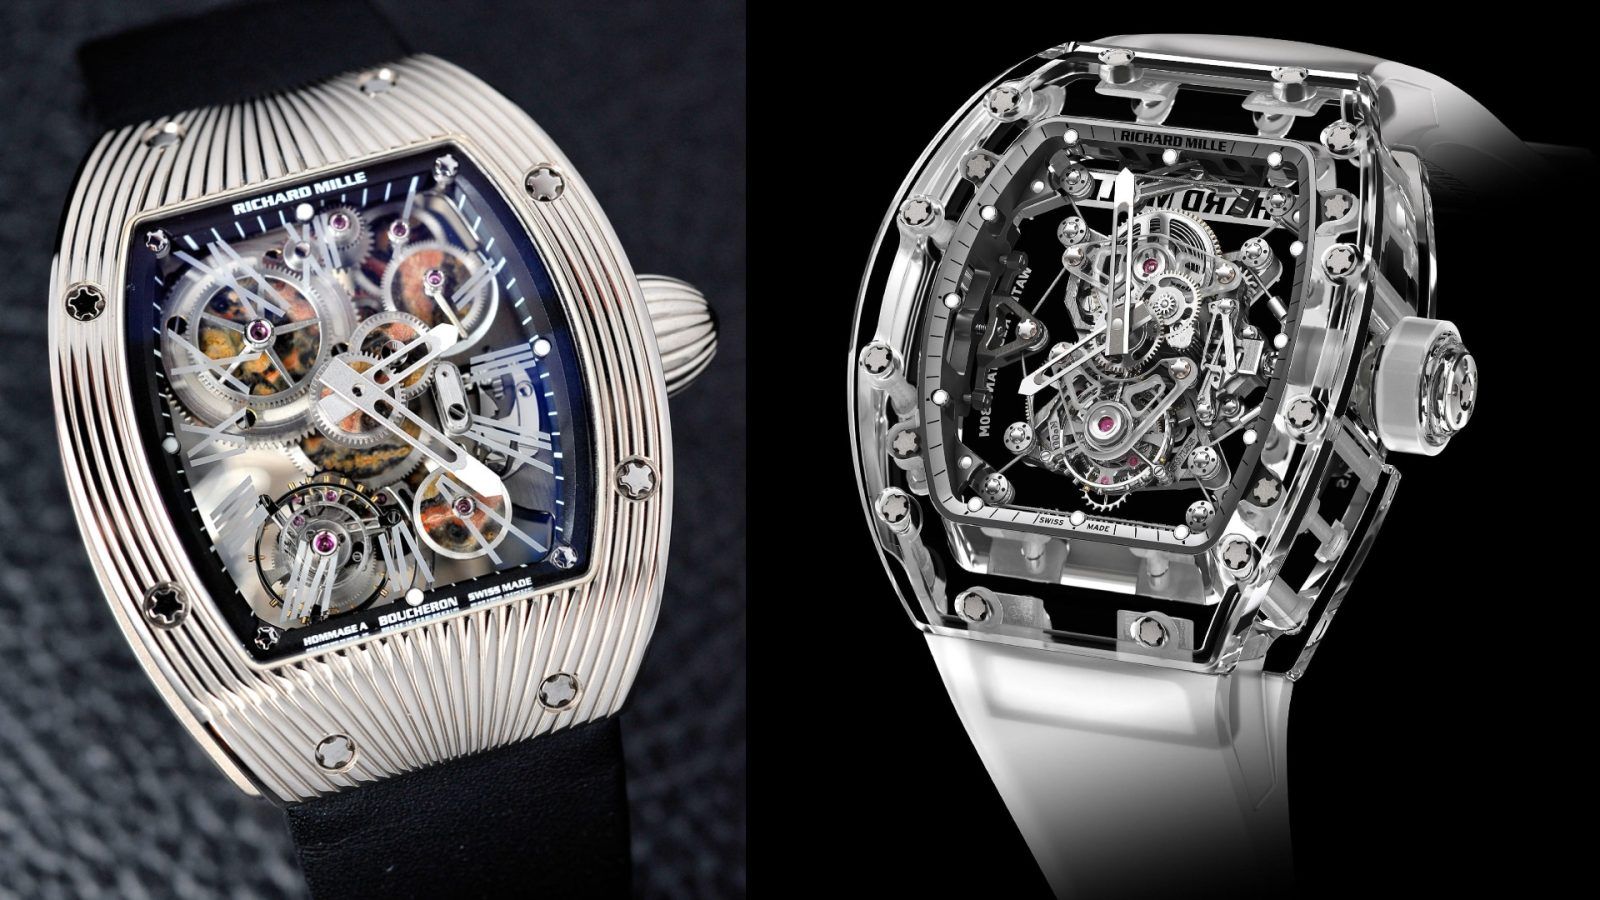 10 Most Expensive Richard Mille Watches